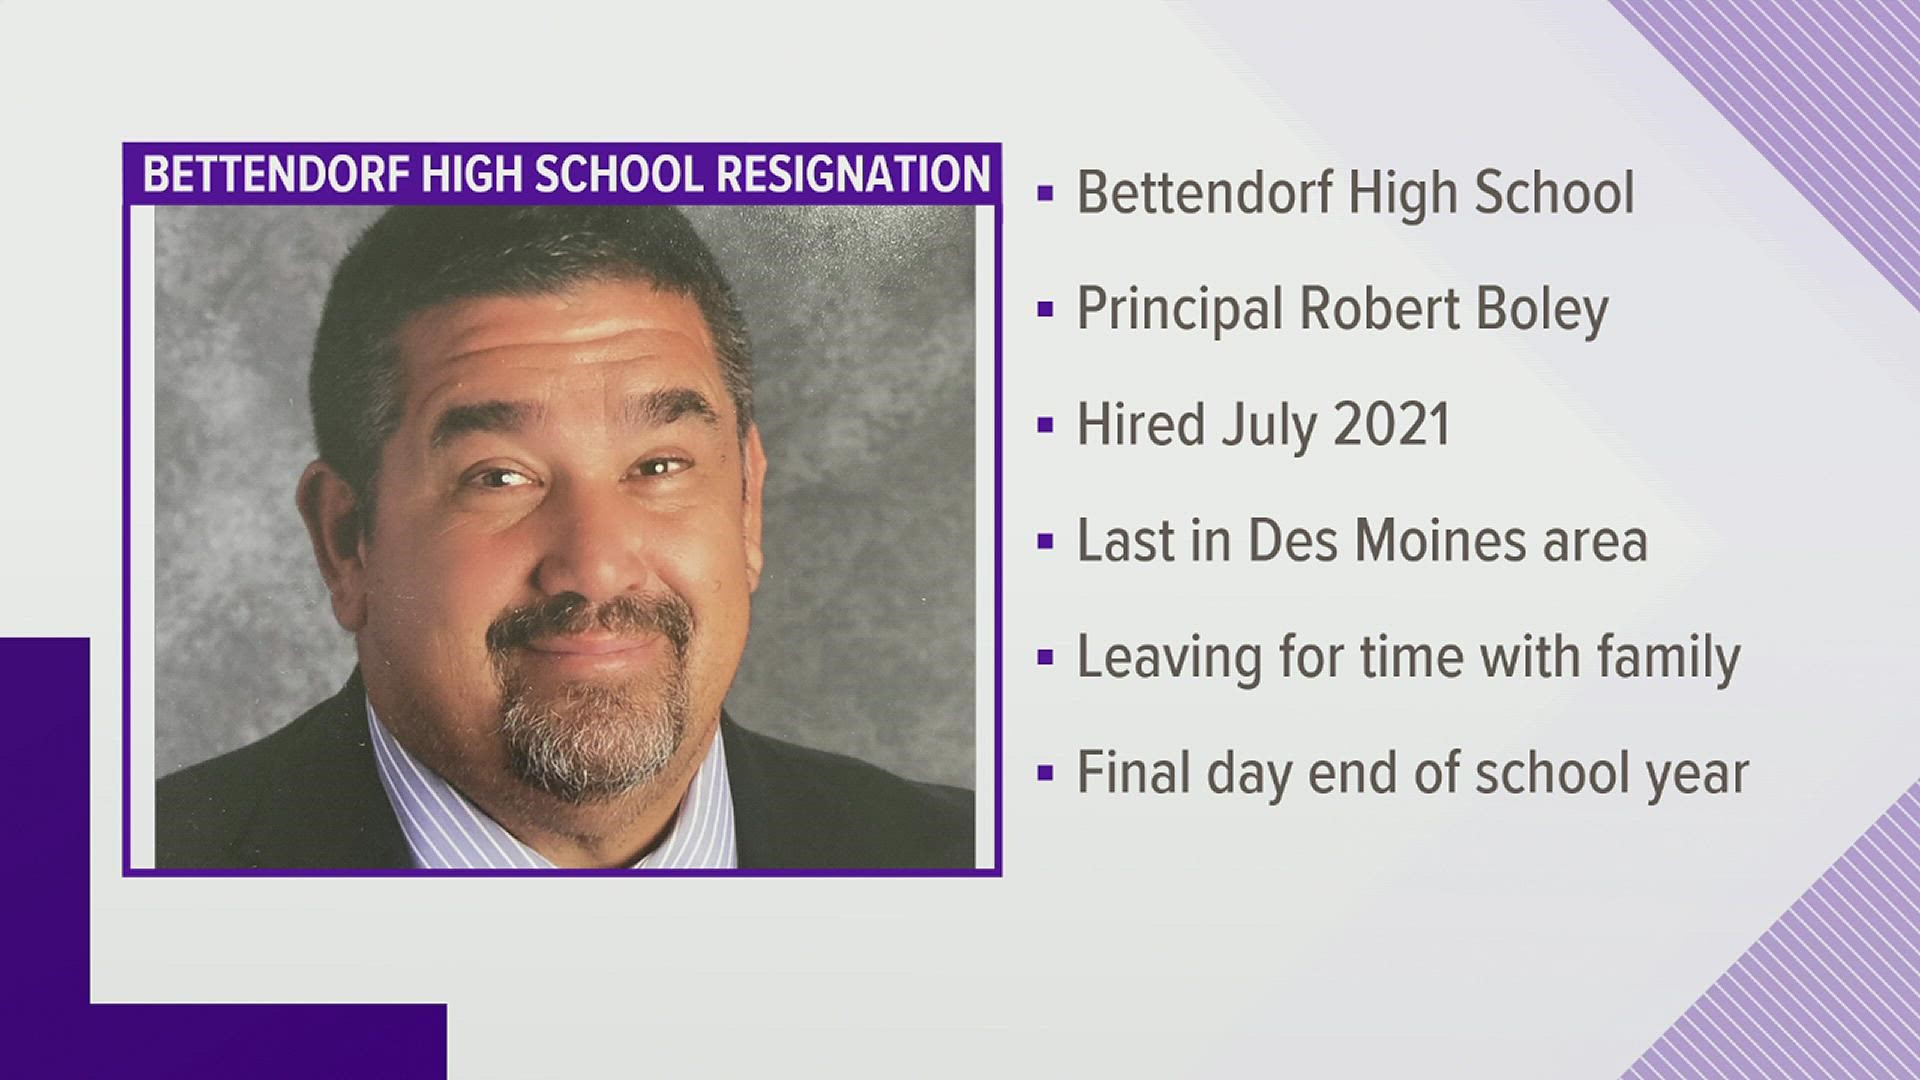 Principal Boley is leaving the position after only a single year at the helm of BHS.